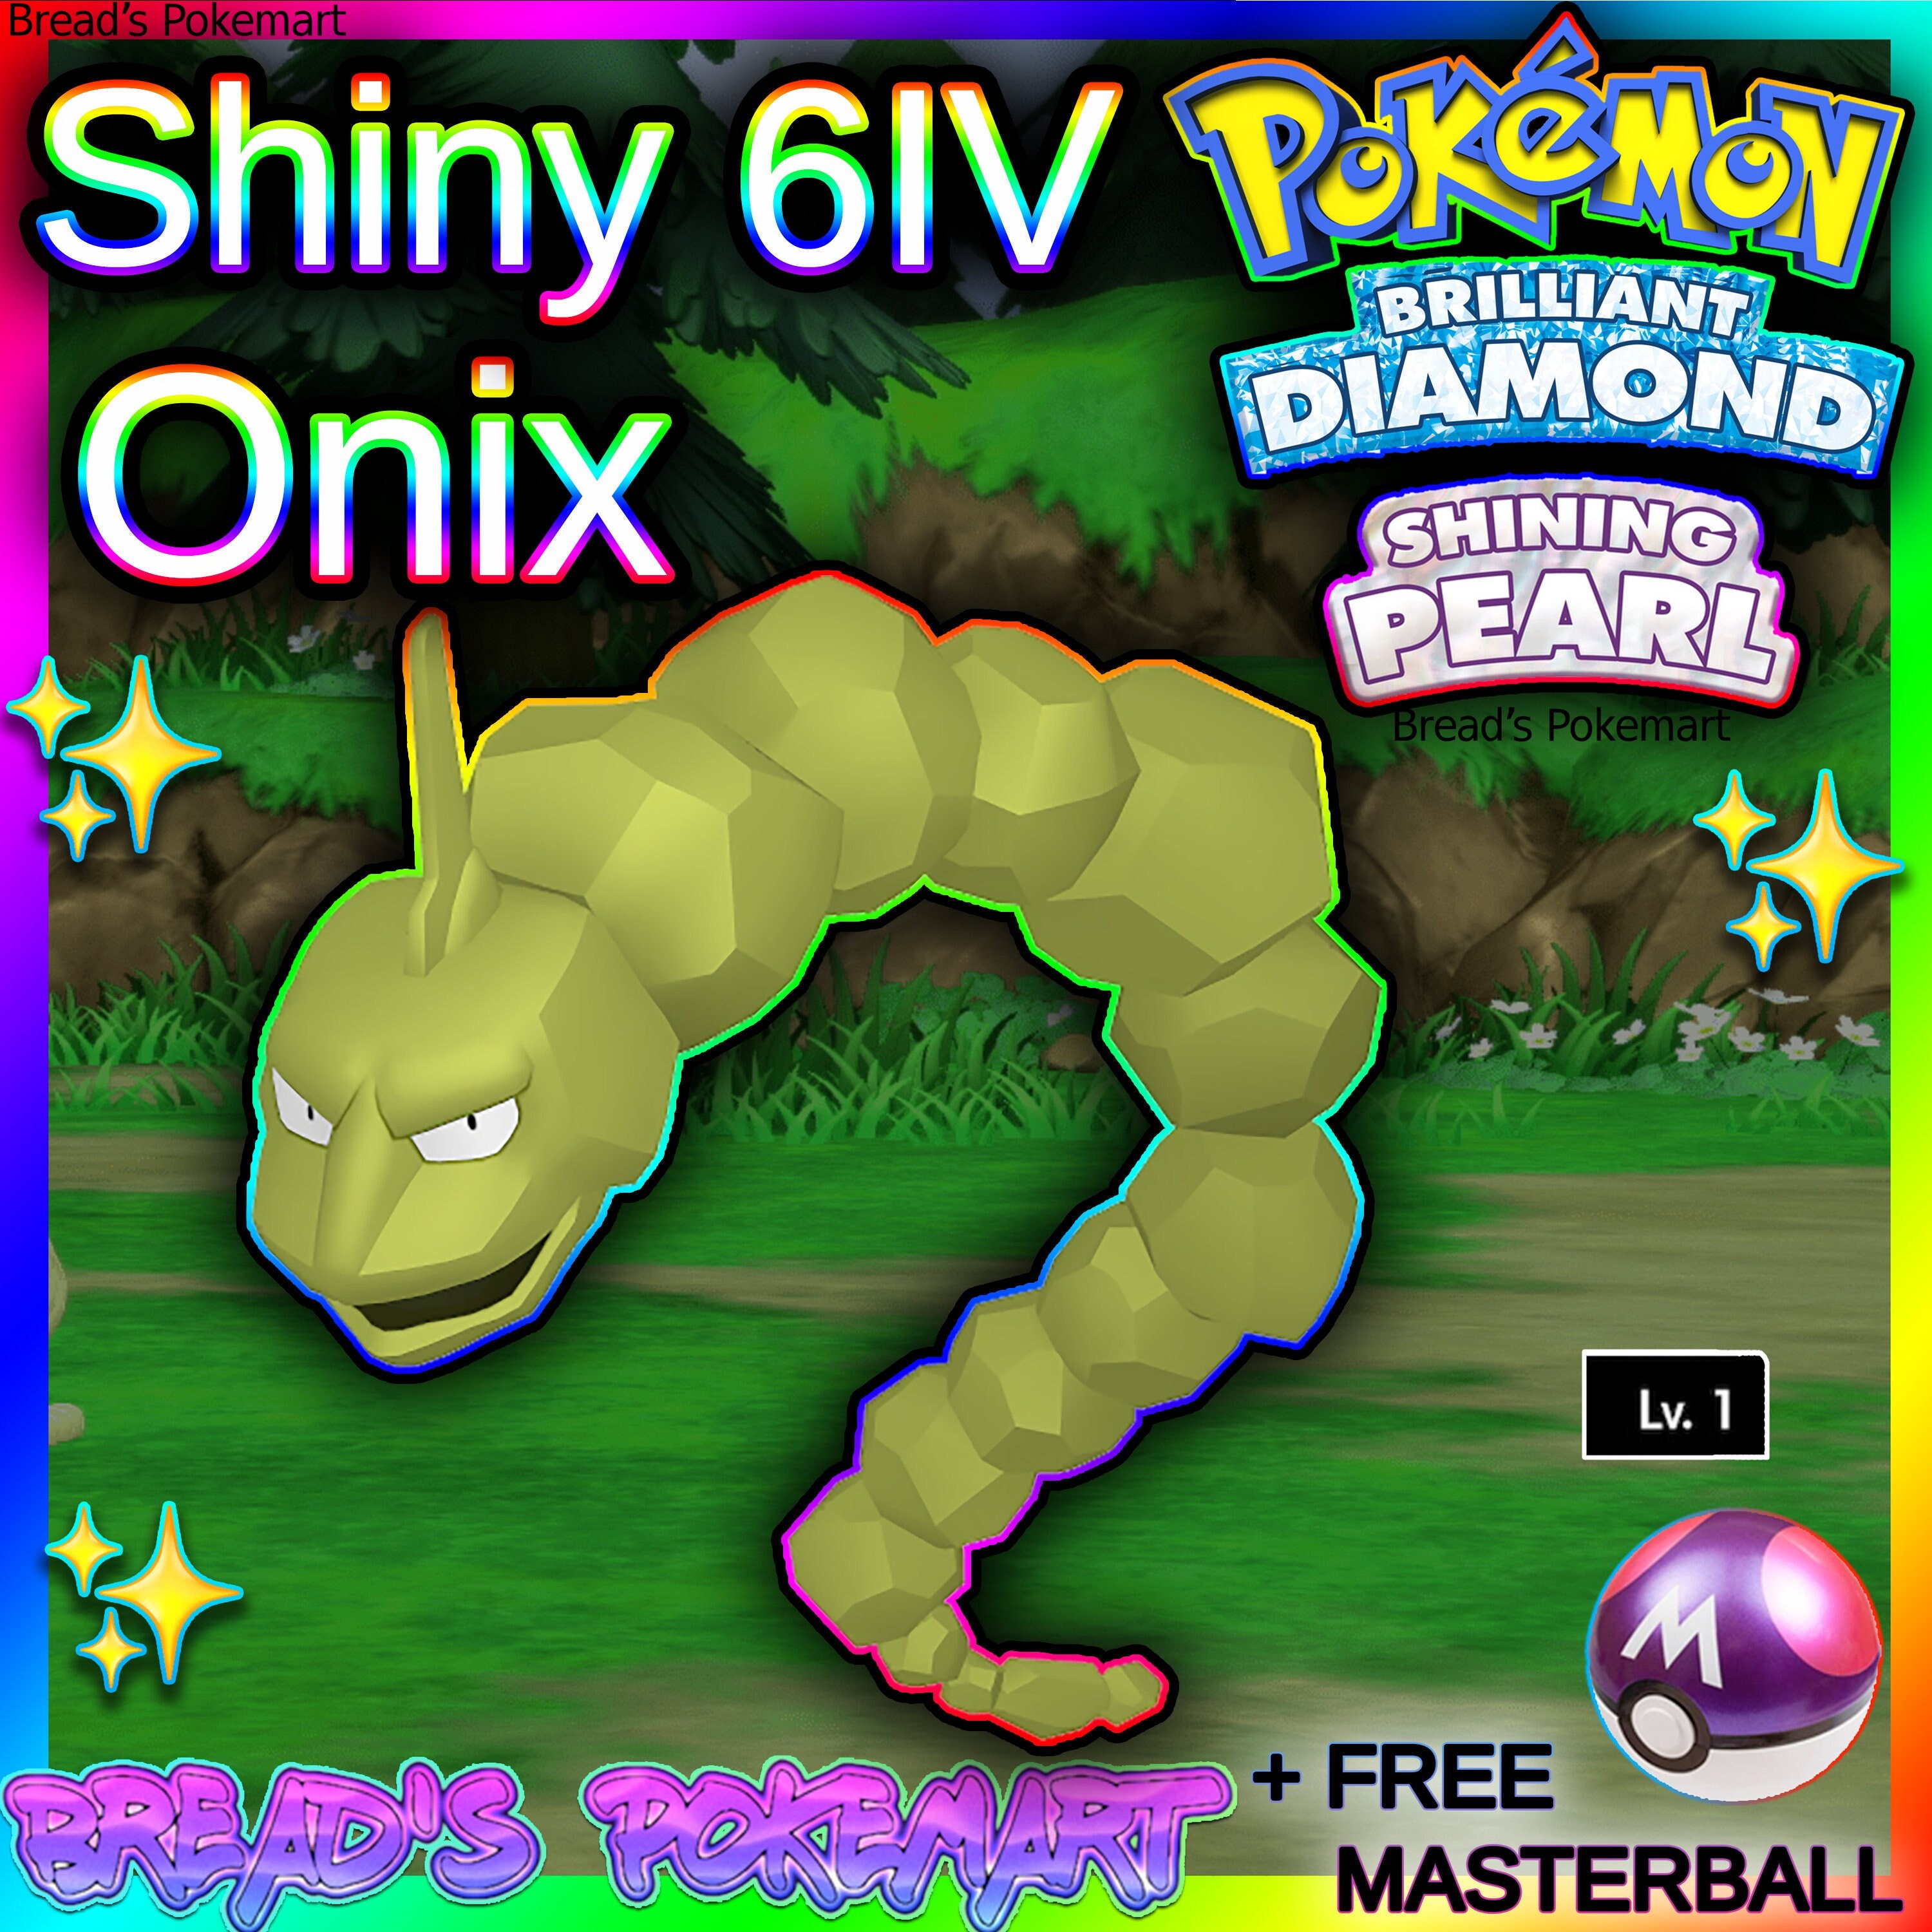 ✨ Shiny Onix ✨ Pokemon Sword and Shield Perfect IV🚀Fast Delivery🚀